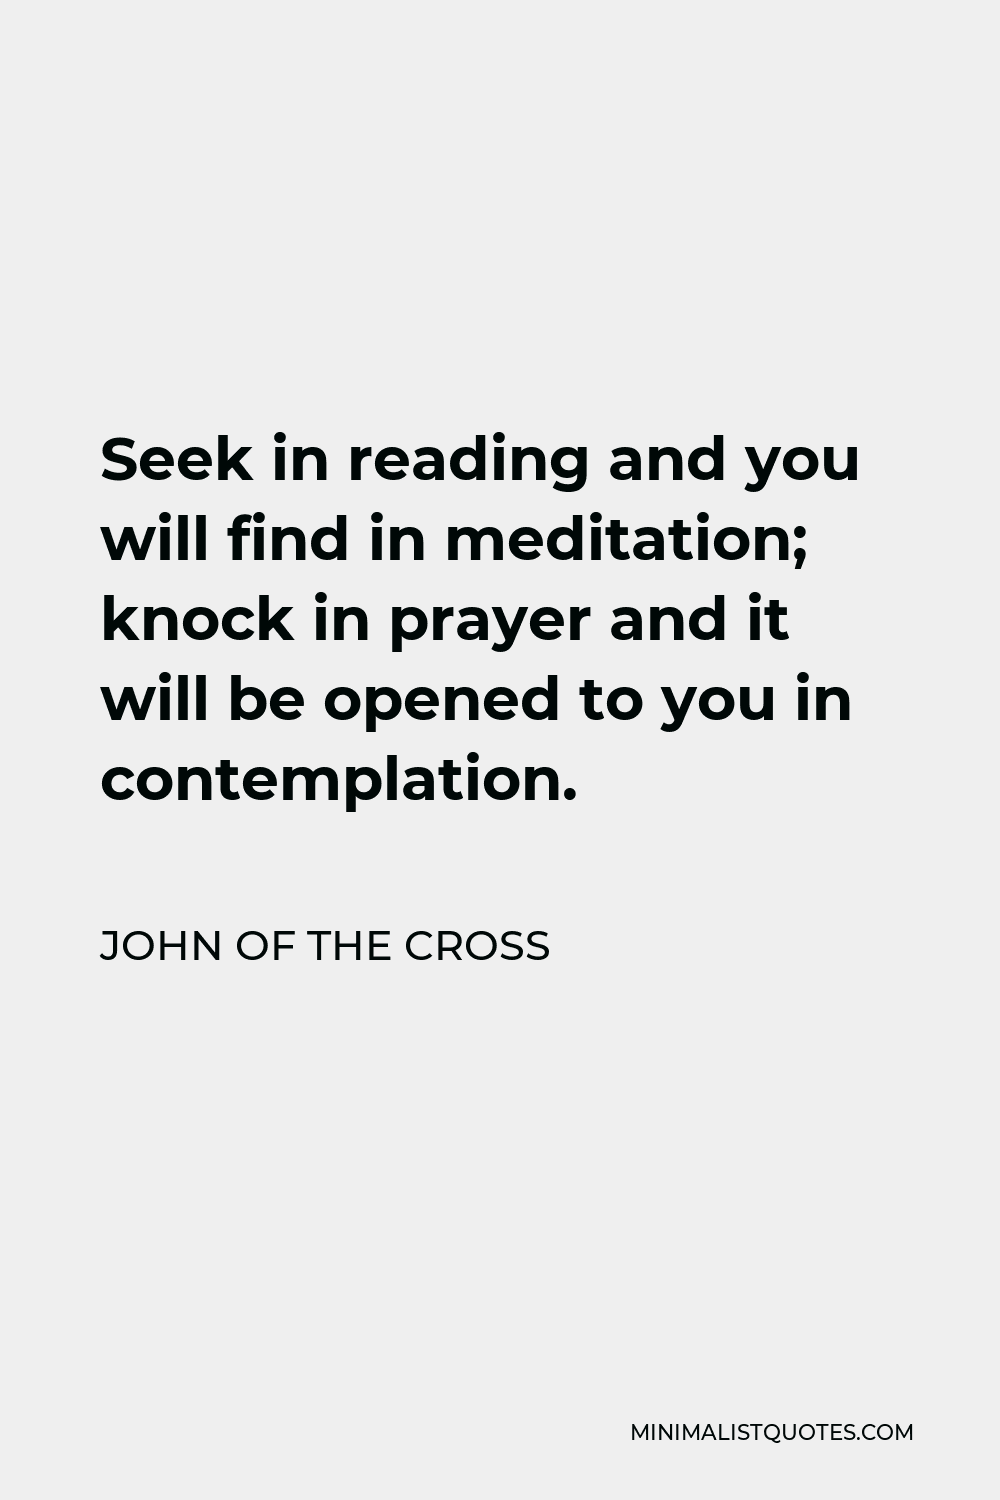 John of the Cross Quote - Seek in reading and you will find in meditation; knock in prayer and it will be opened to you in contemplation.